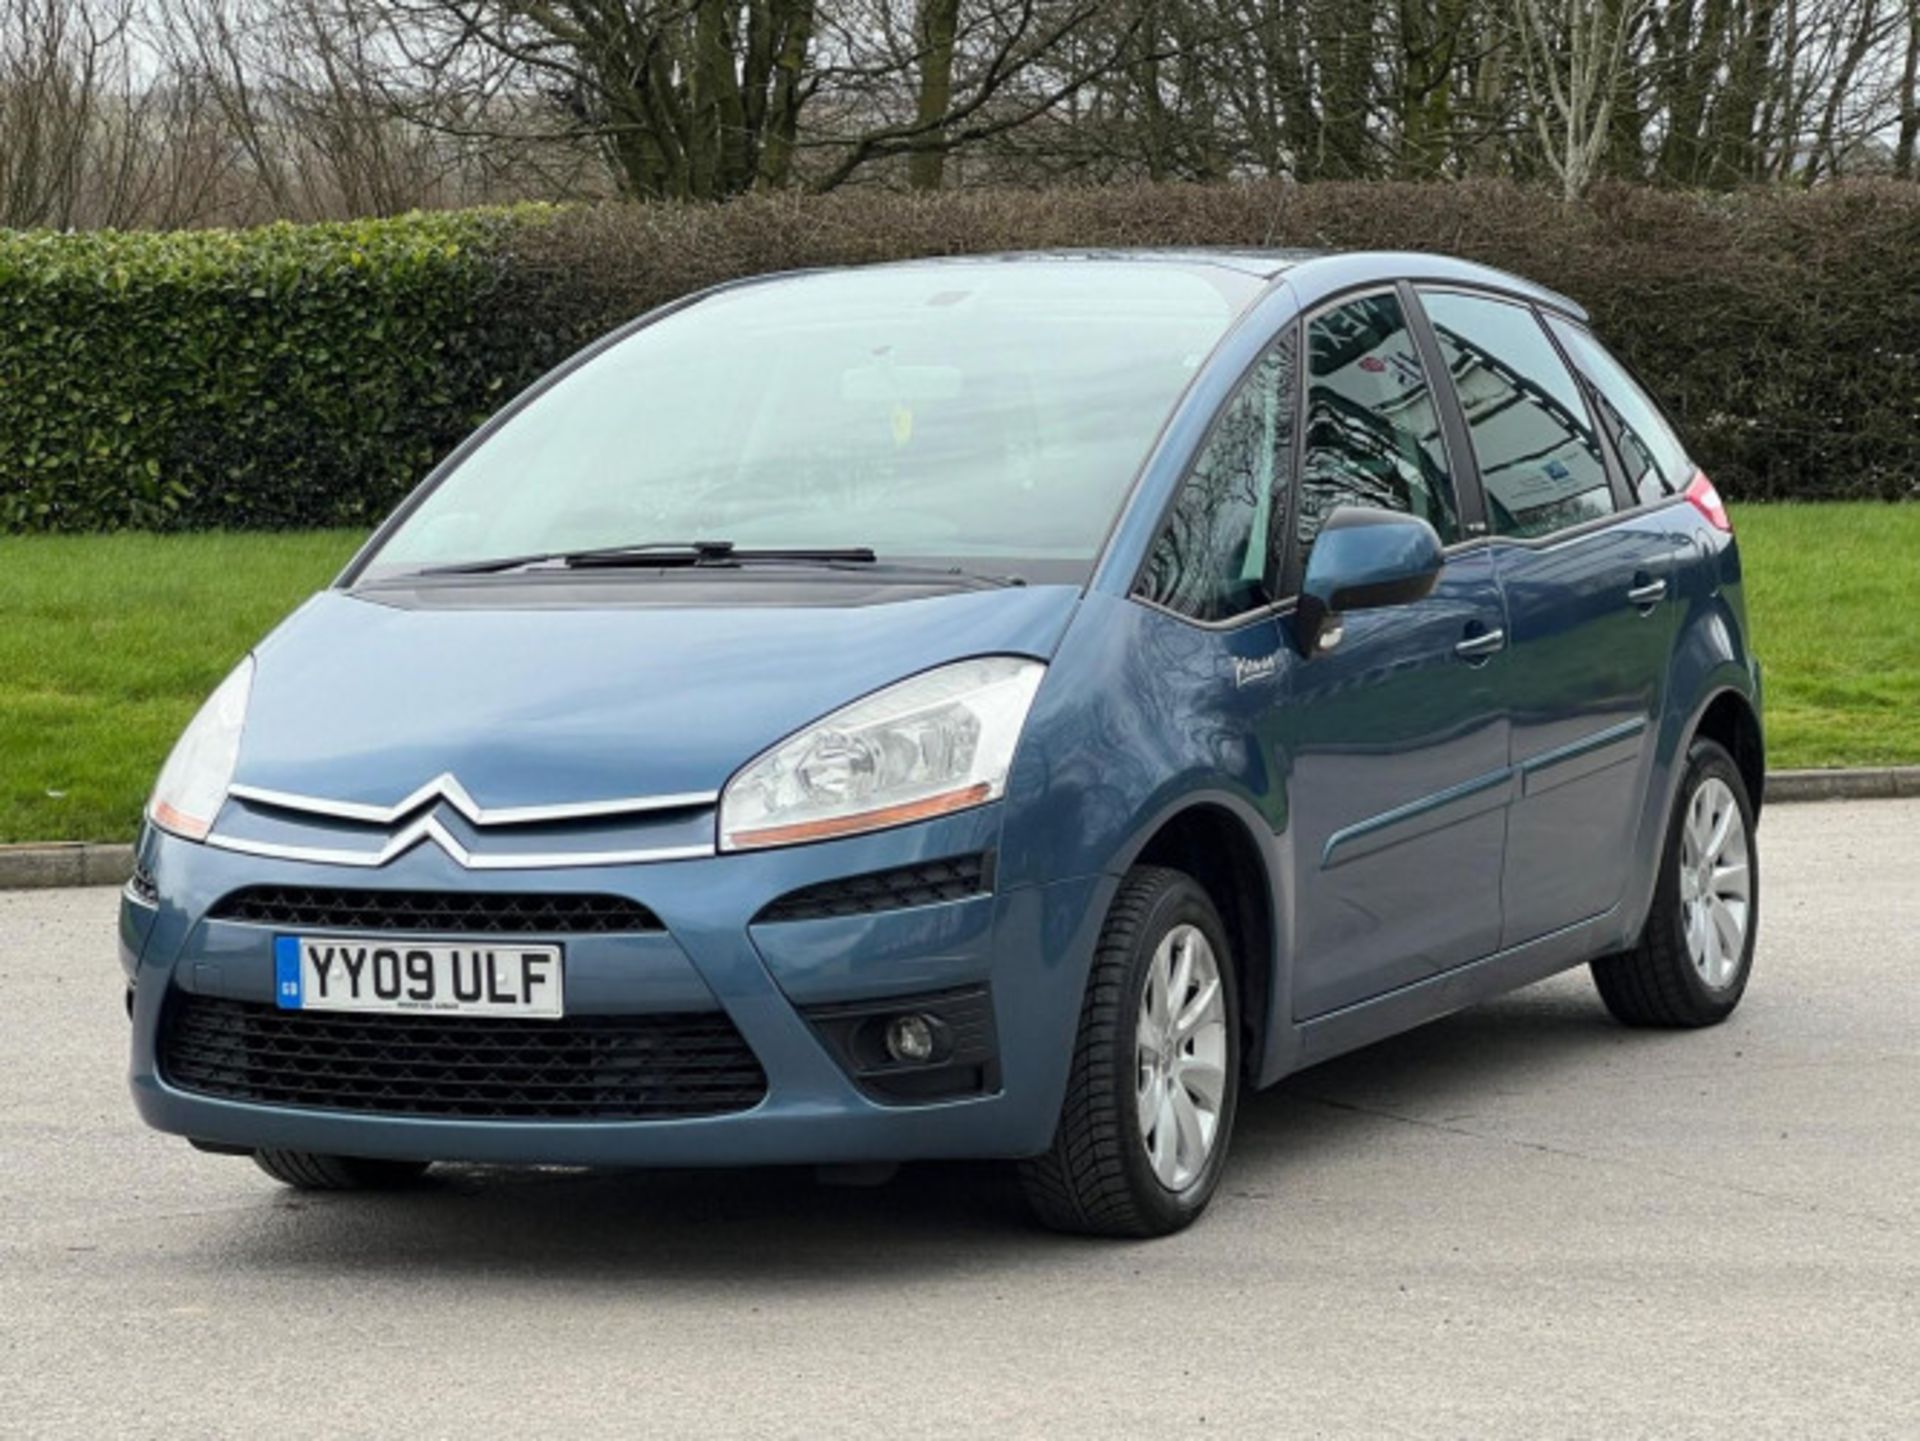 2009 CITROEN C4 PICASSO 1.6 HDI VTR+ EGS6 5DR >>--NO VAT ON HAMMER--<< - Image 117 of 123